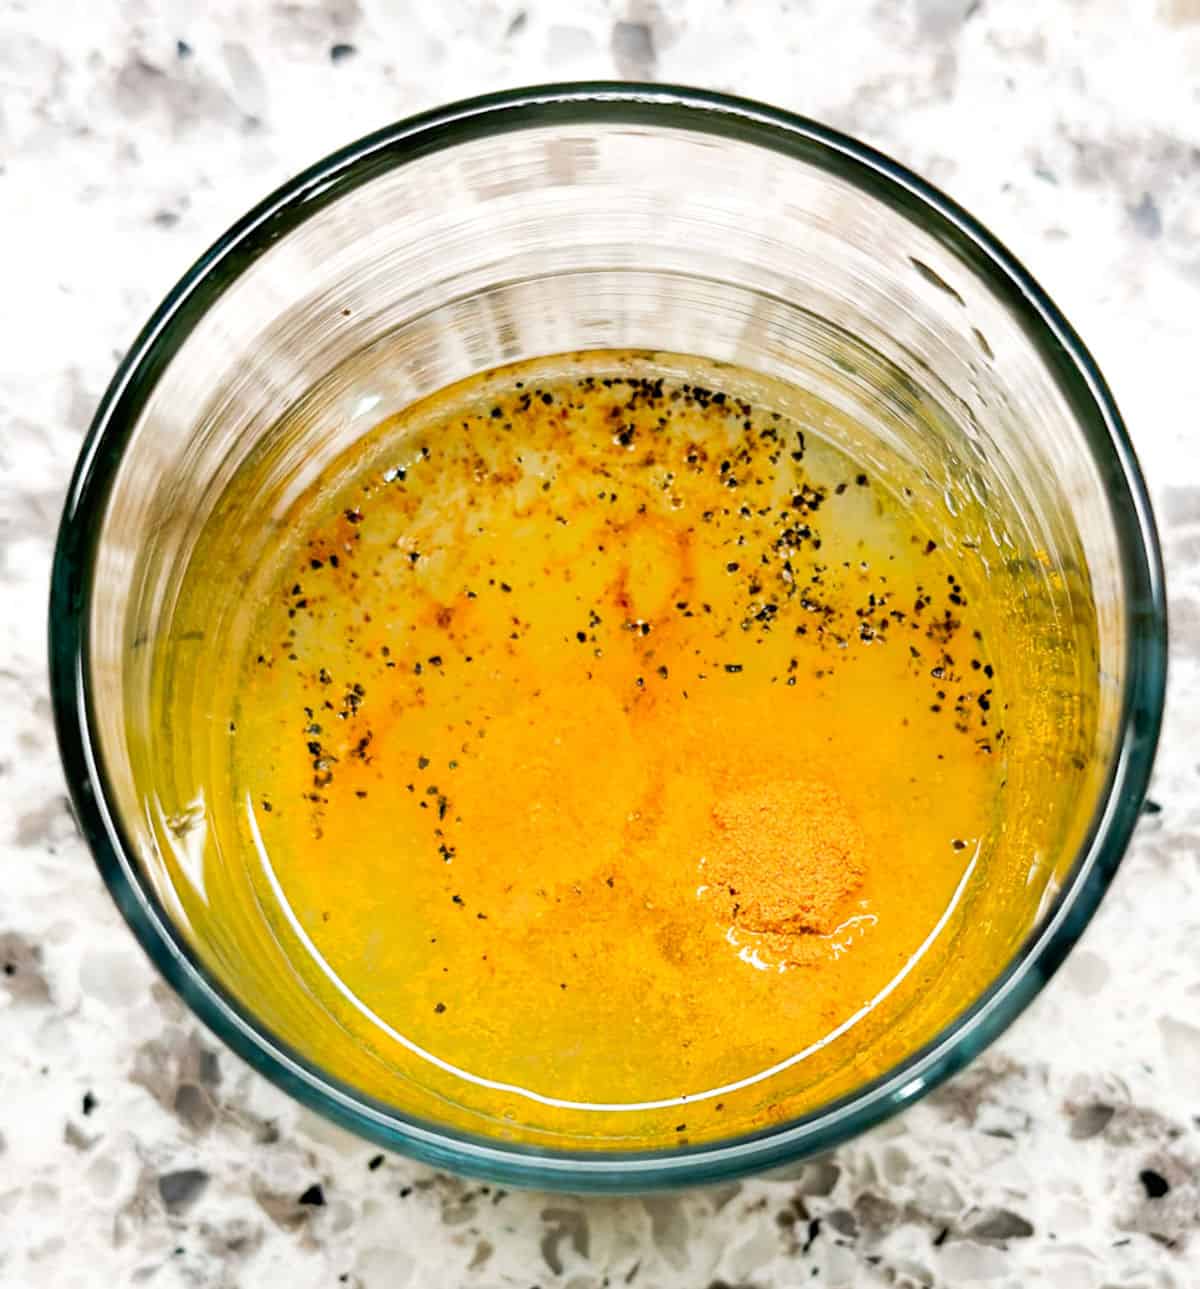 A birds eye view of a clear glass with lemon juice in it. On top of the juice is a scoop of turmeric powder, a splash of cayenne pepper, and a pinch of black pepper sprinkled in it before it is stirred.